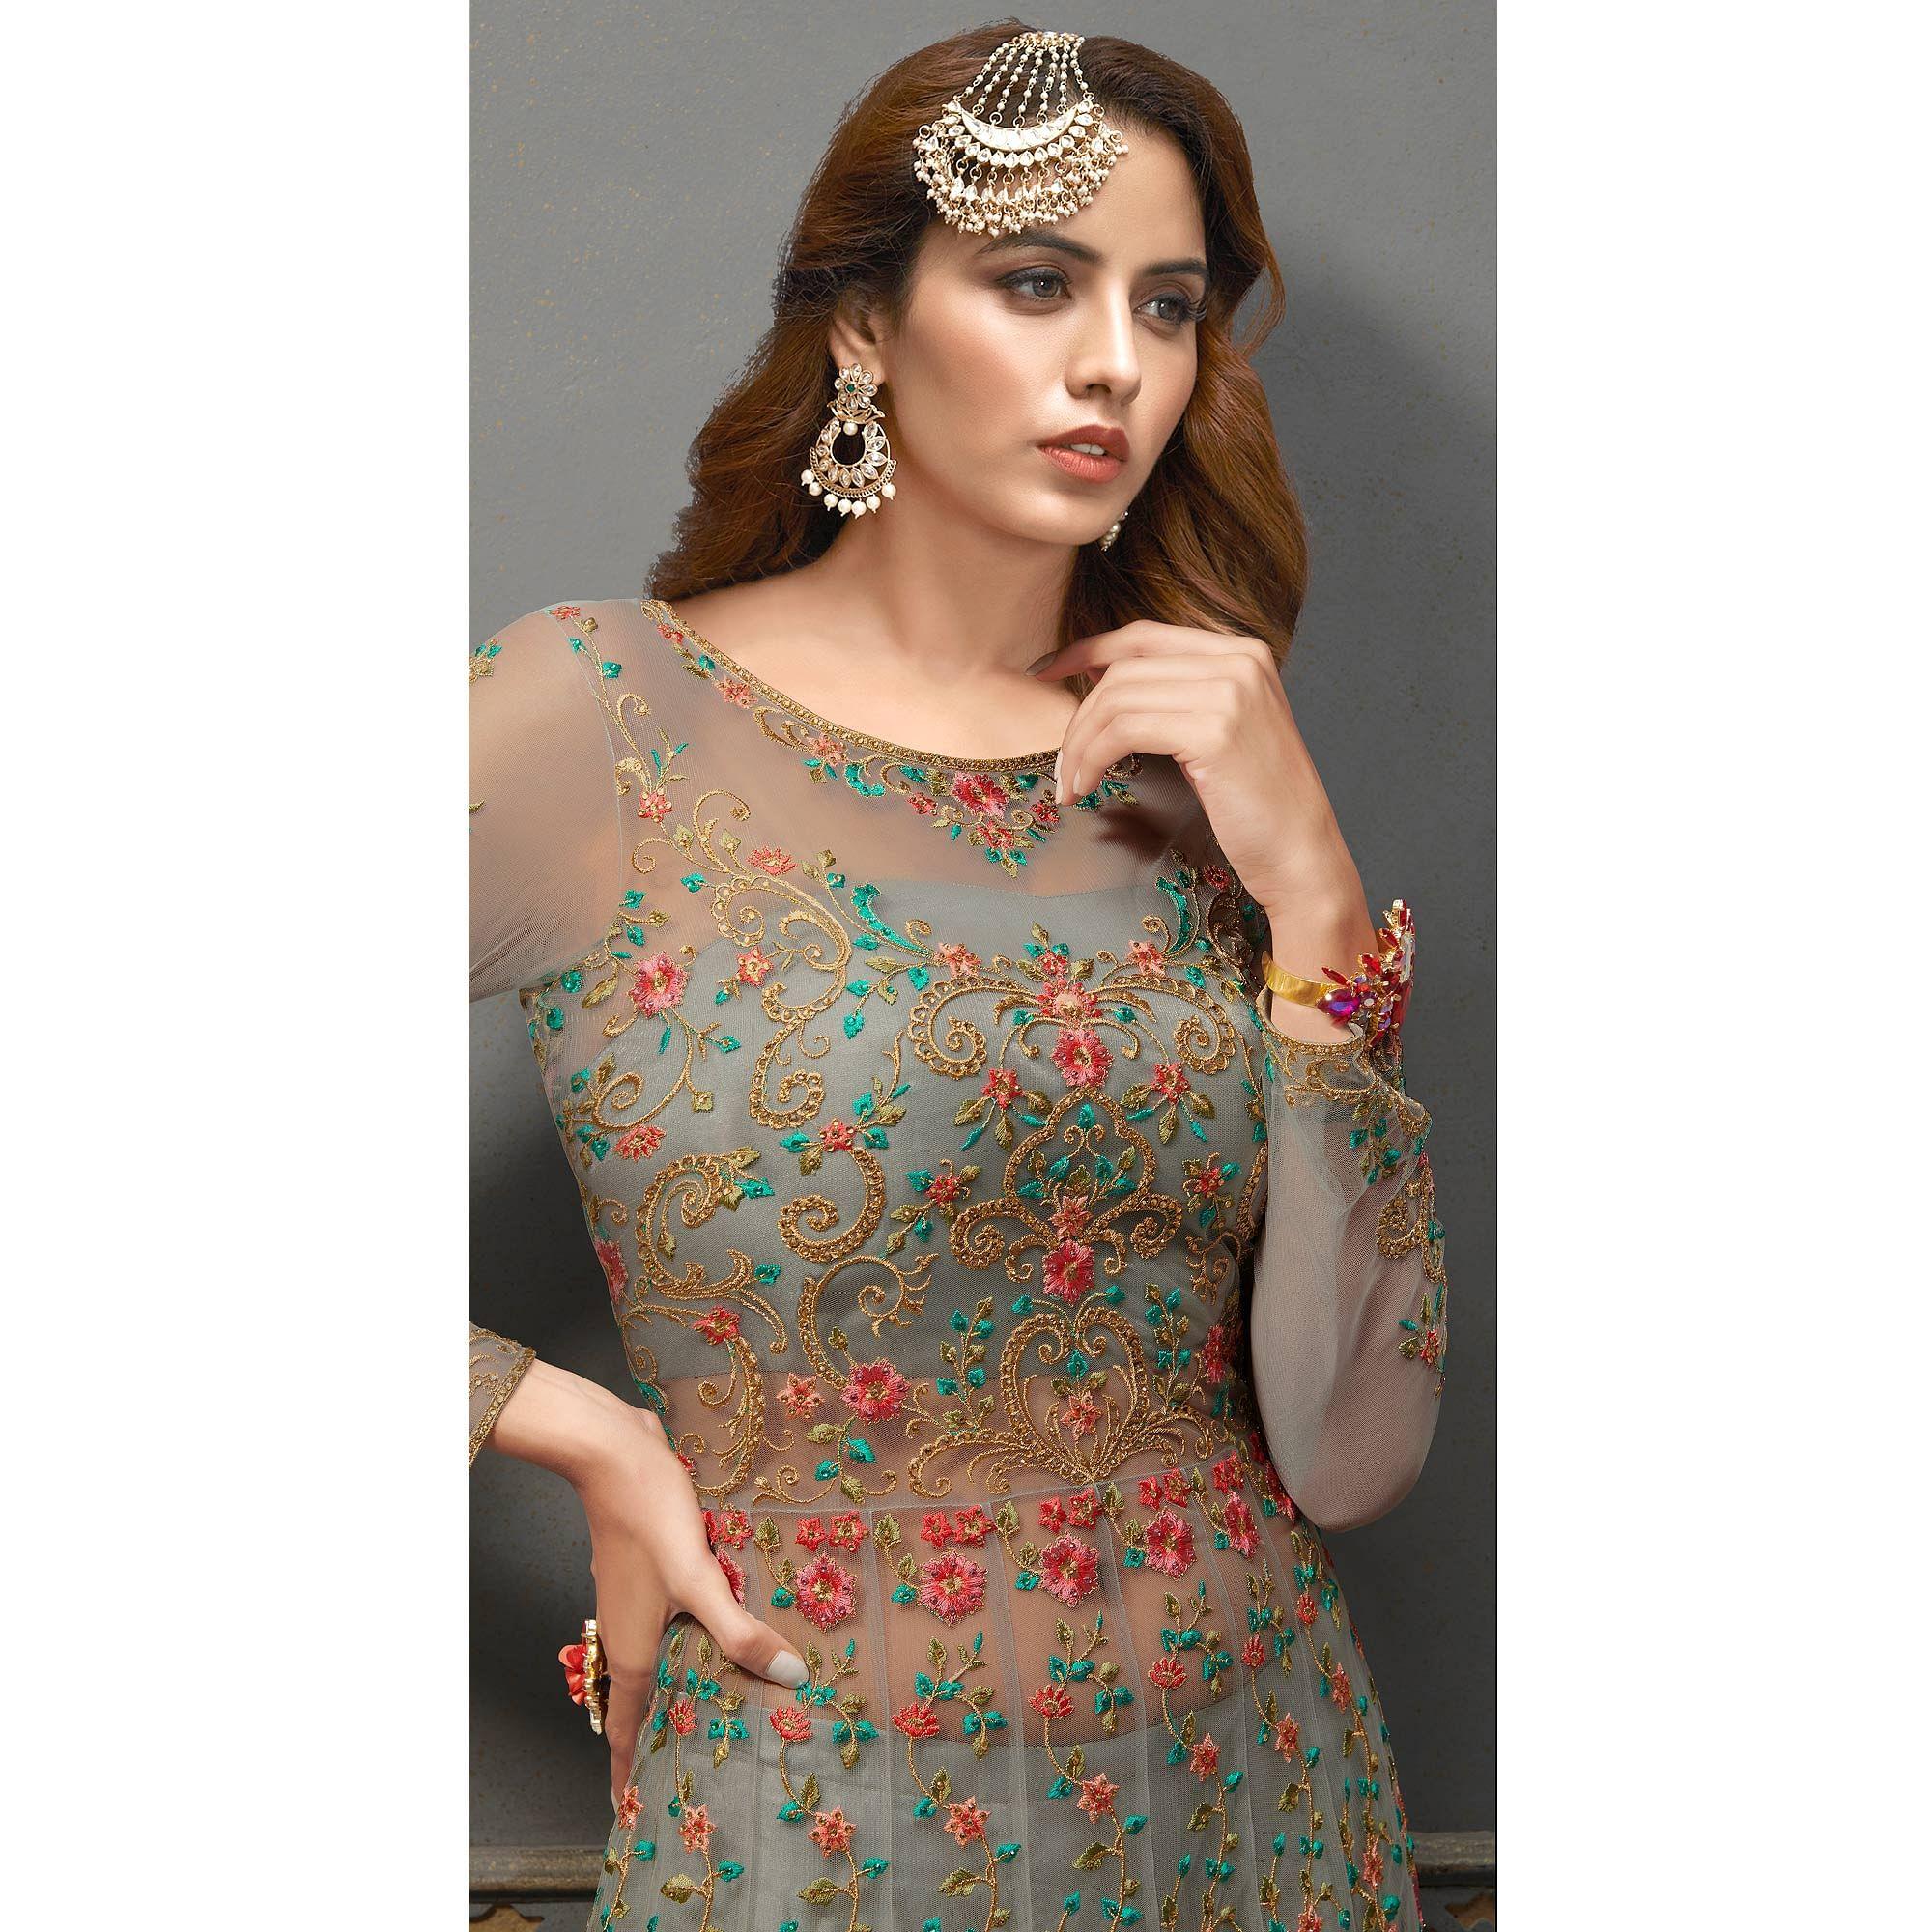 Grey Floral Embroidered With Handwork Soft Net Partywear Gown - Peachmode